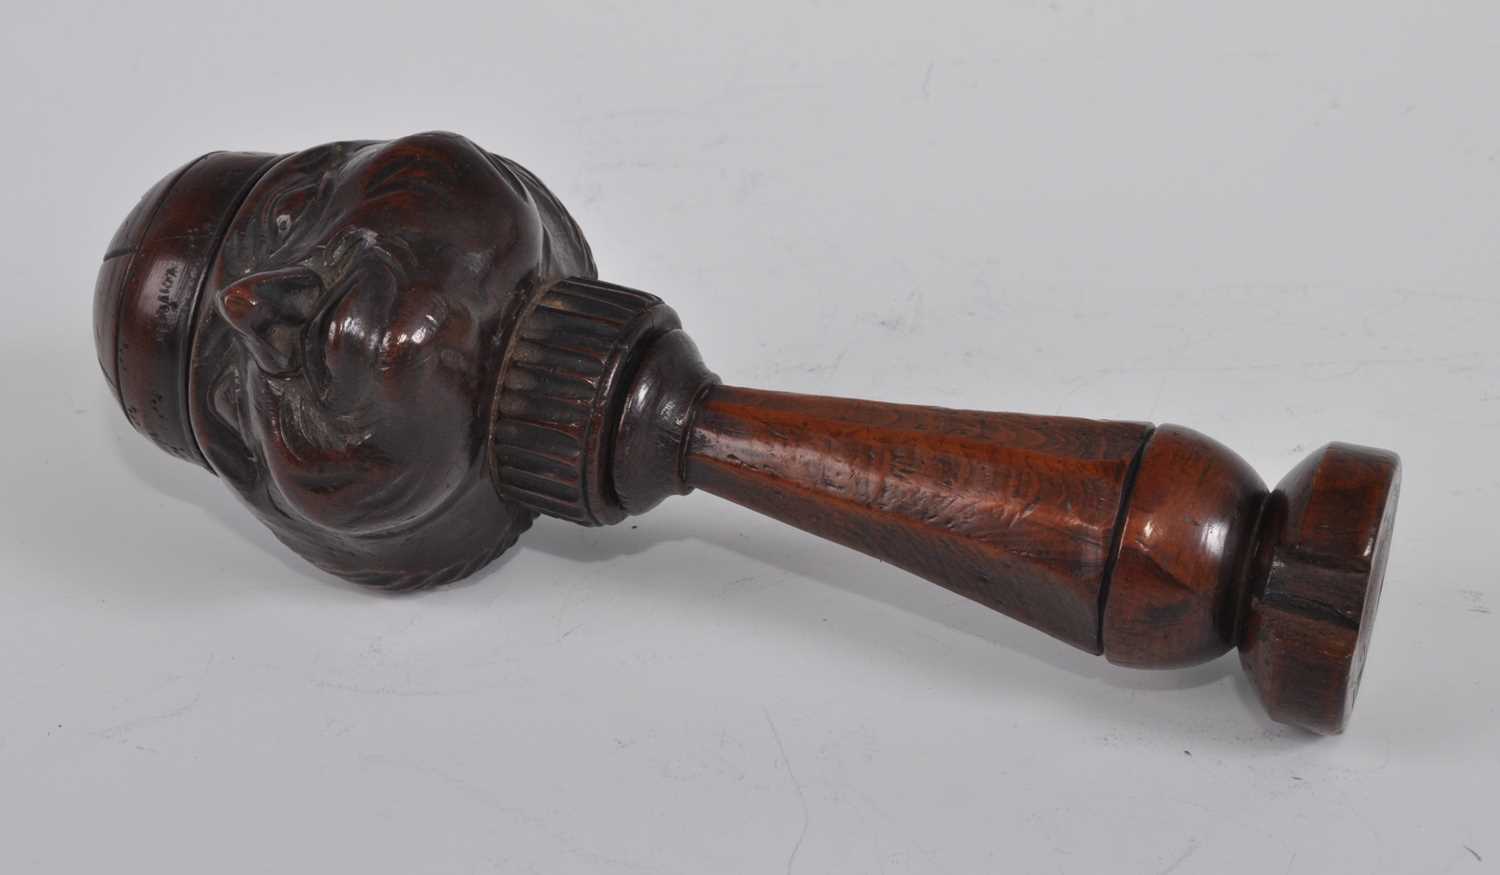 A 19th century treen figurative nutcracker, the head as a smiling man wearing a cap, the tapered